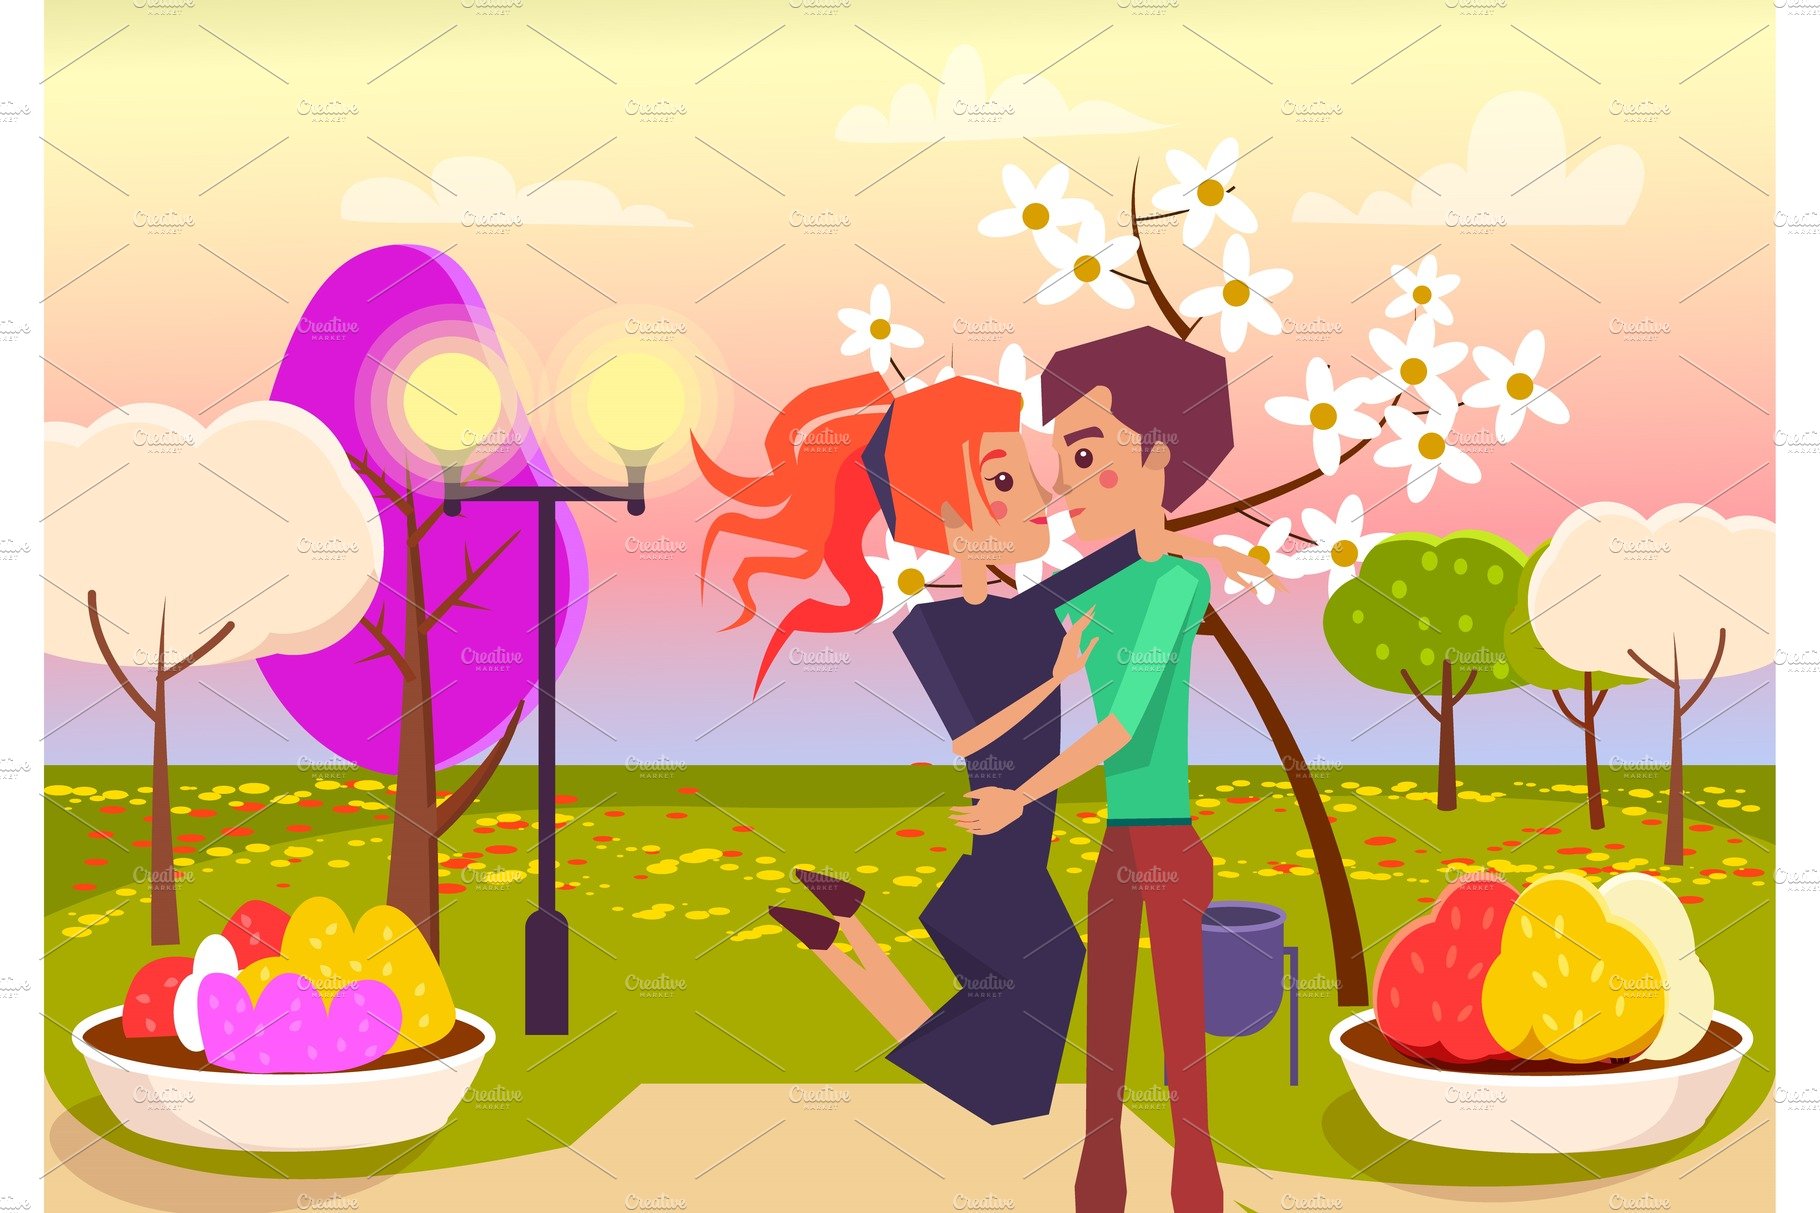 Happy Couple Hugs in Park at Sunset Illustration cover image.